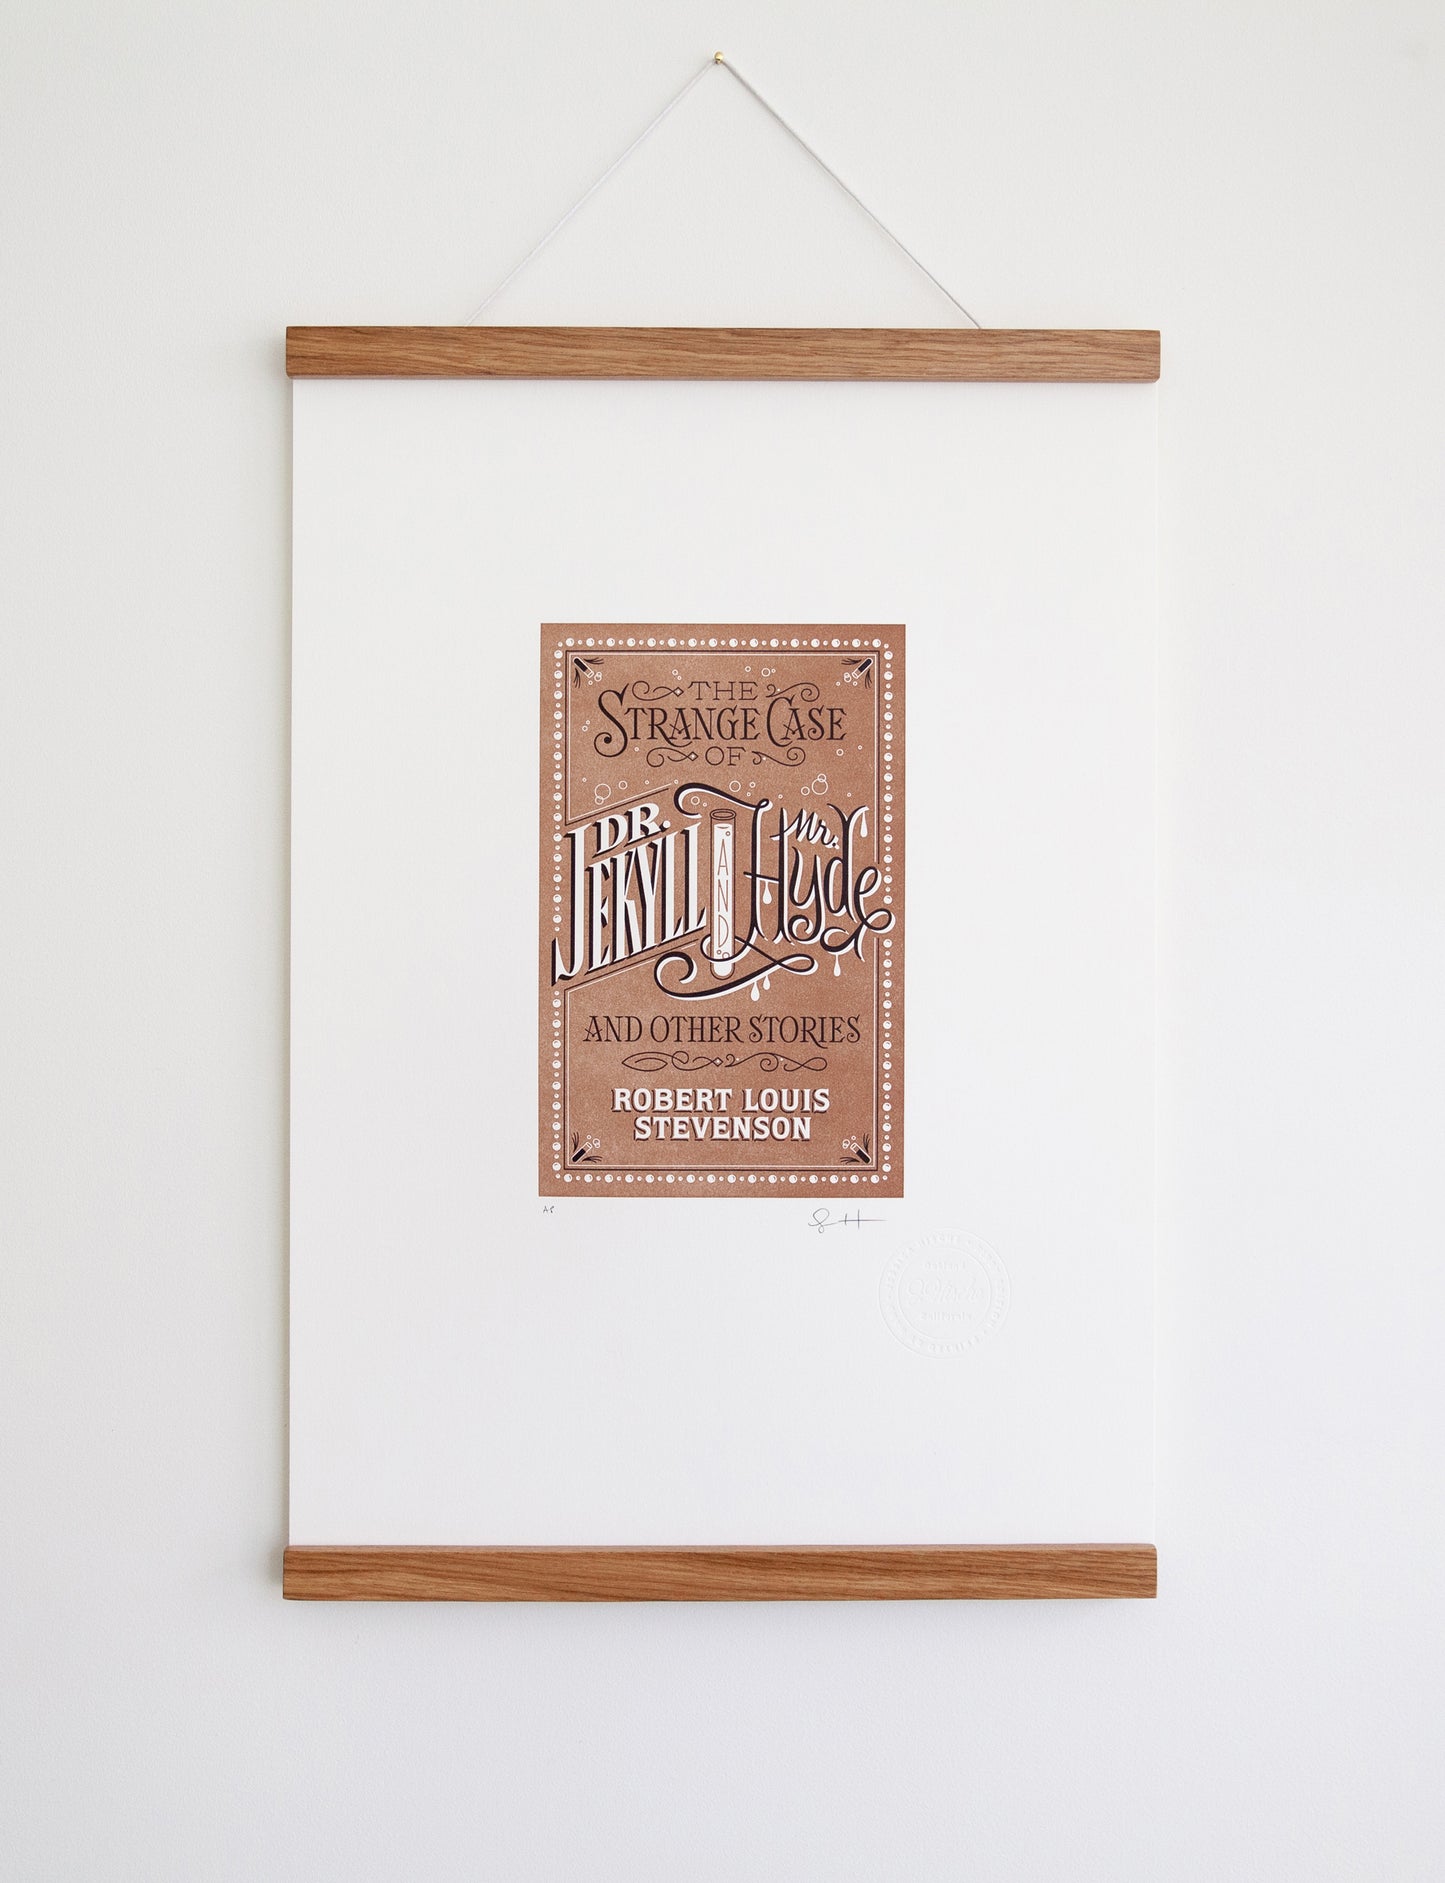 Framed 2-color letterpress print in brown and black. Printed artwork is an illustrated book cover of Dr. Jekyll and Mr. Hyde including custom hand lettering.